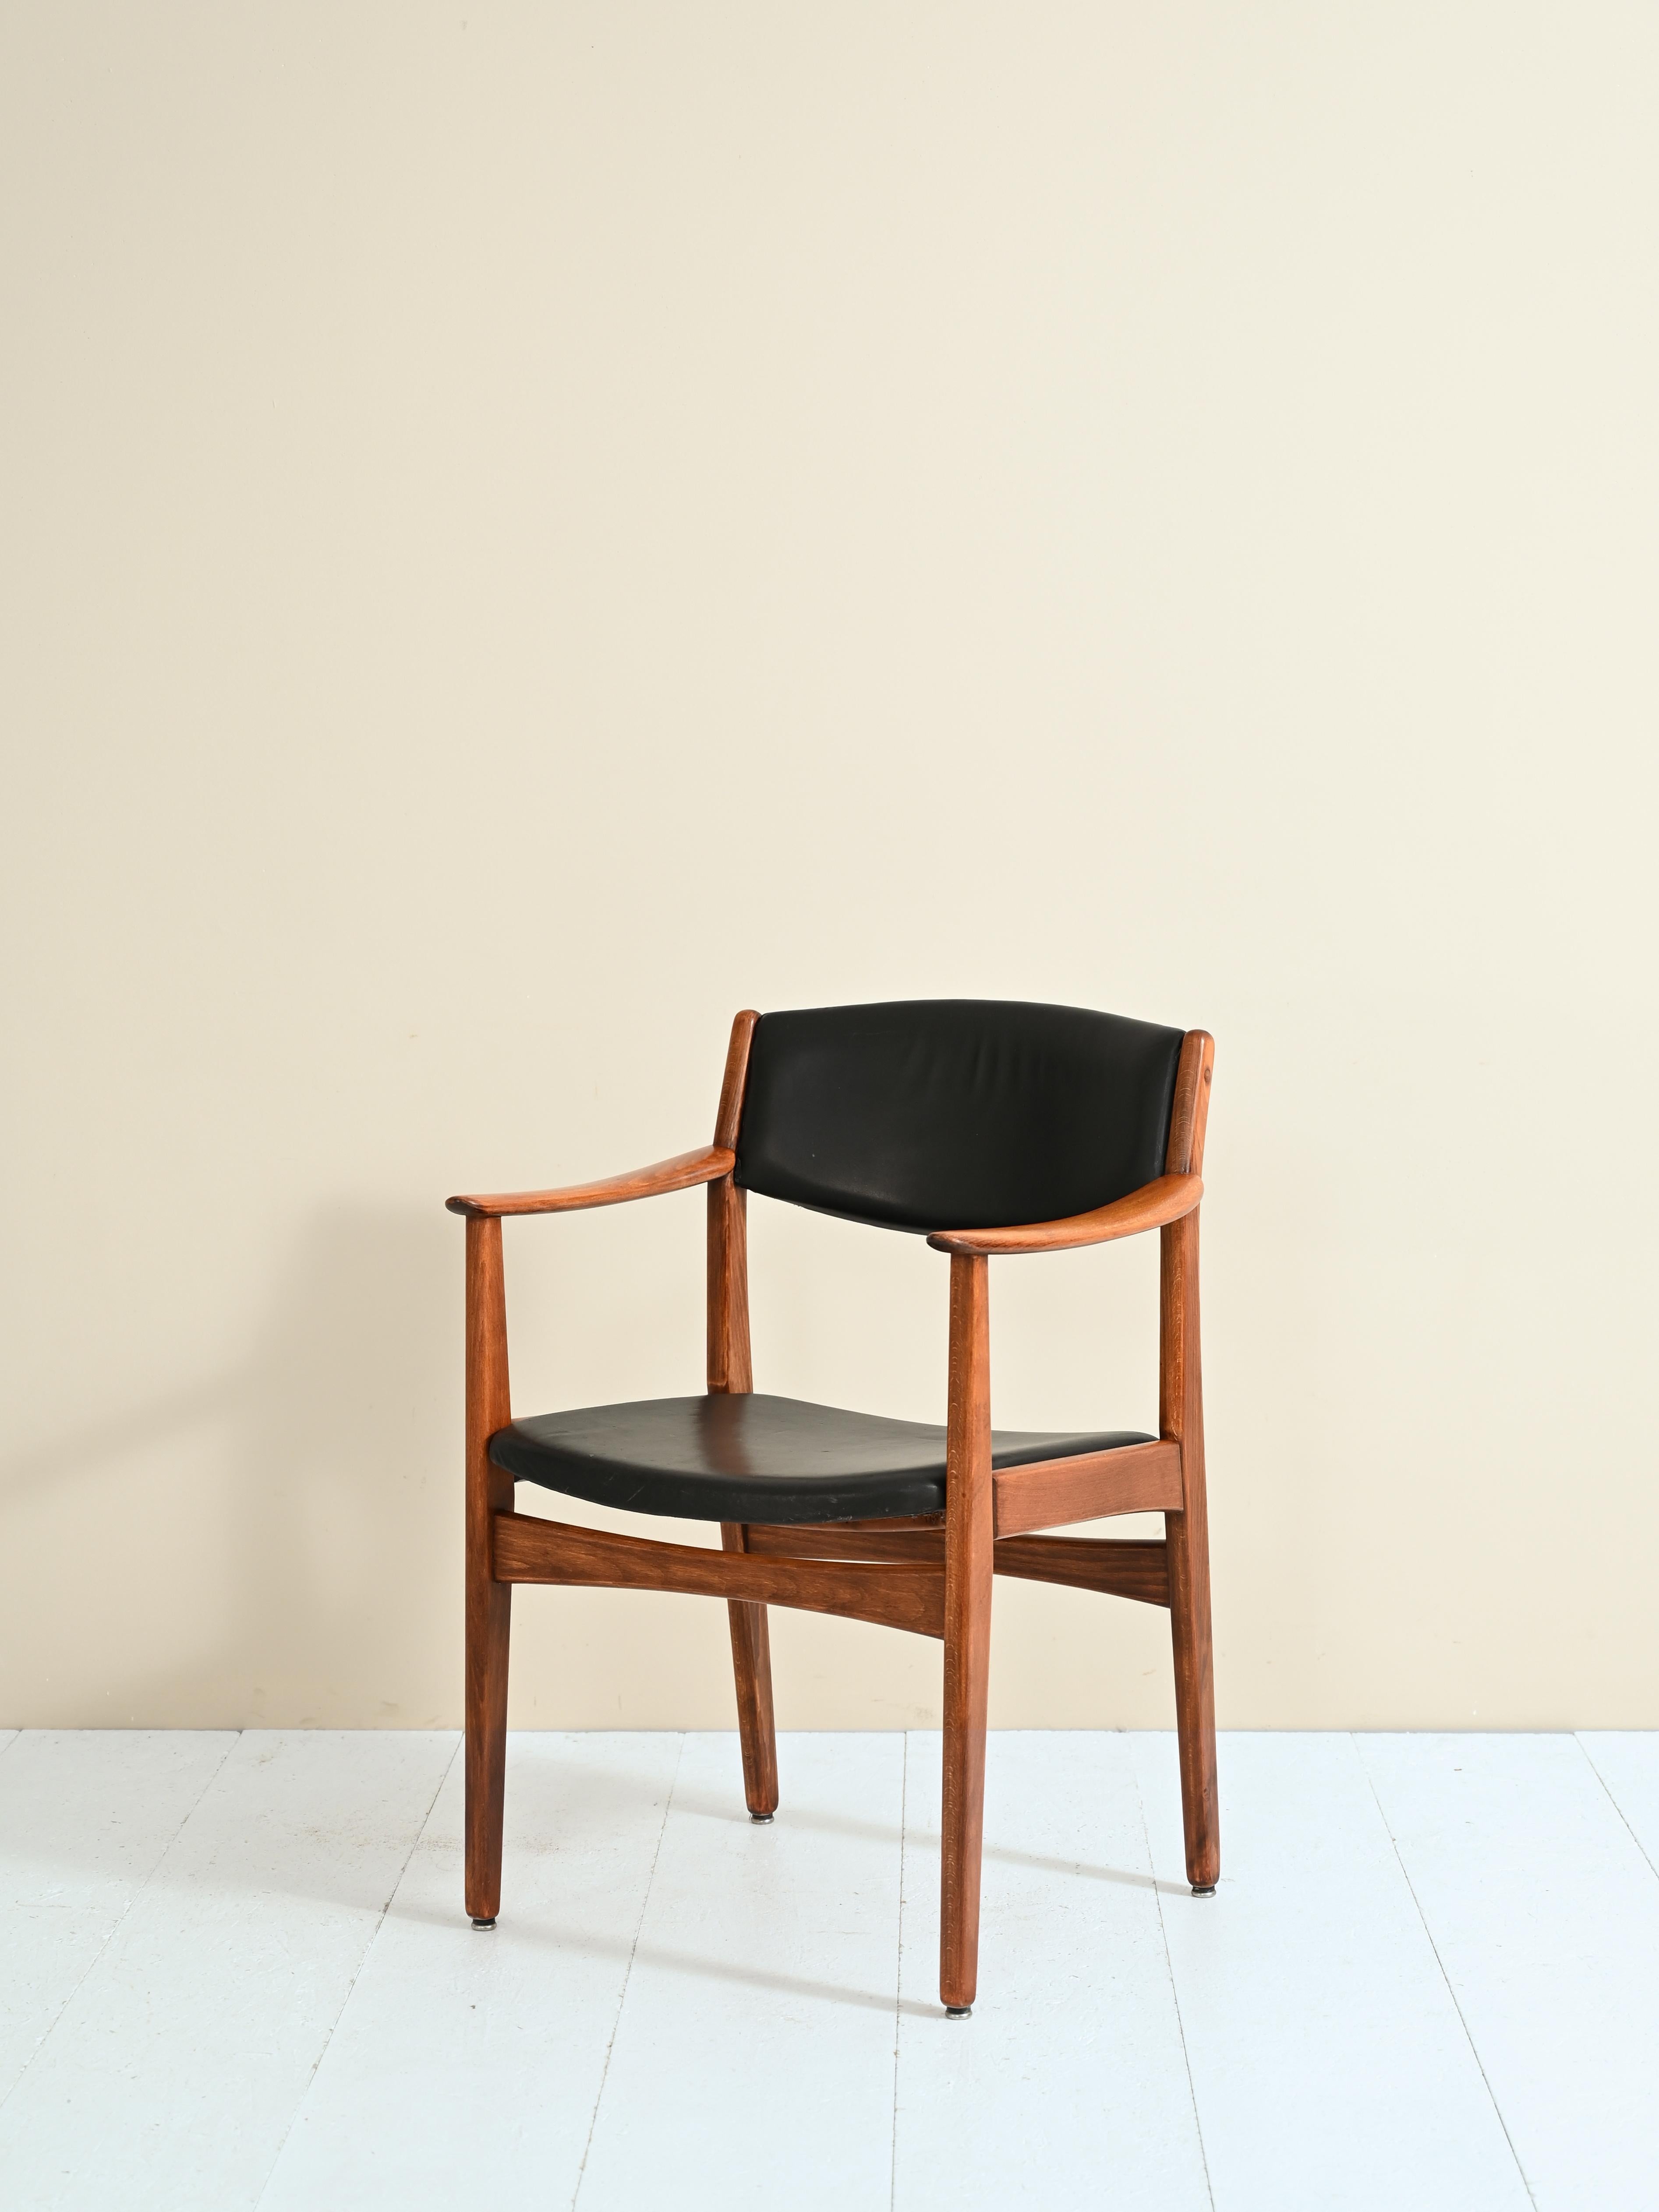 Set of two elegant chairs of original Danish manufacture from the 1950s.

Minimal lines characterize these chairs with clear Scandinavian retro lines.

Good vintage condition.

AC133.